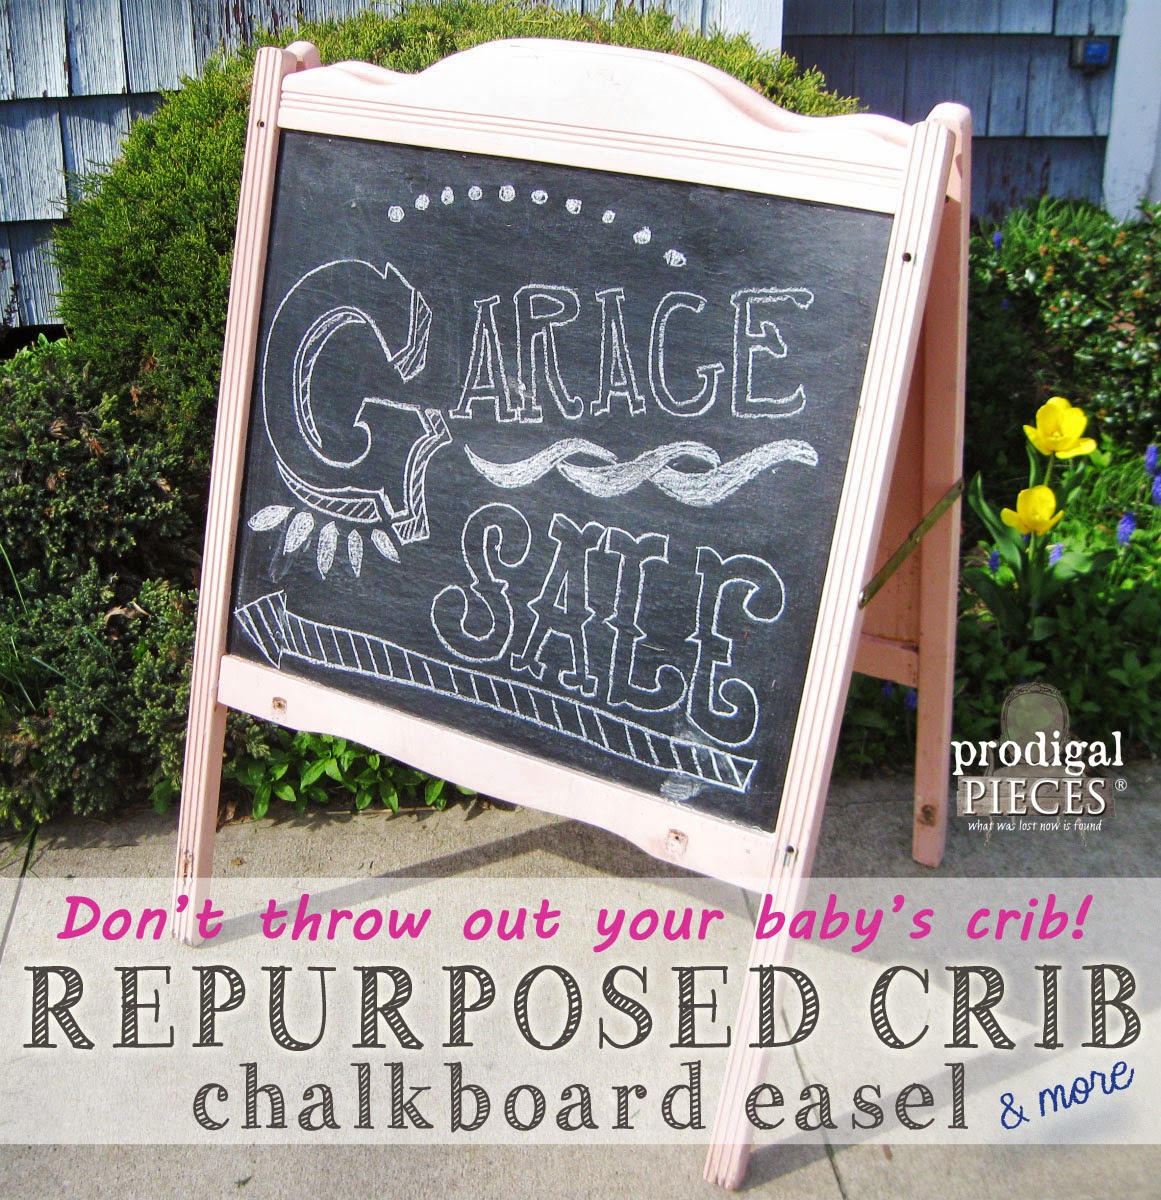 Repupose Your Baby's Crib Into a Chalkboard Easel, Garden Trellis, Drying Rack & More! by Prodigal Pieces www.prodigalpieces.com #prodigalpieces